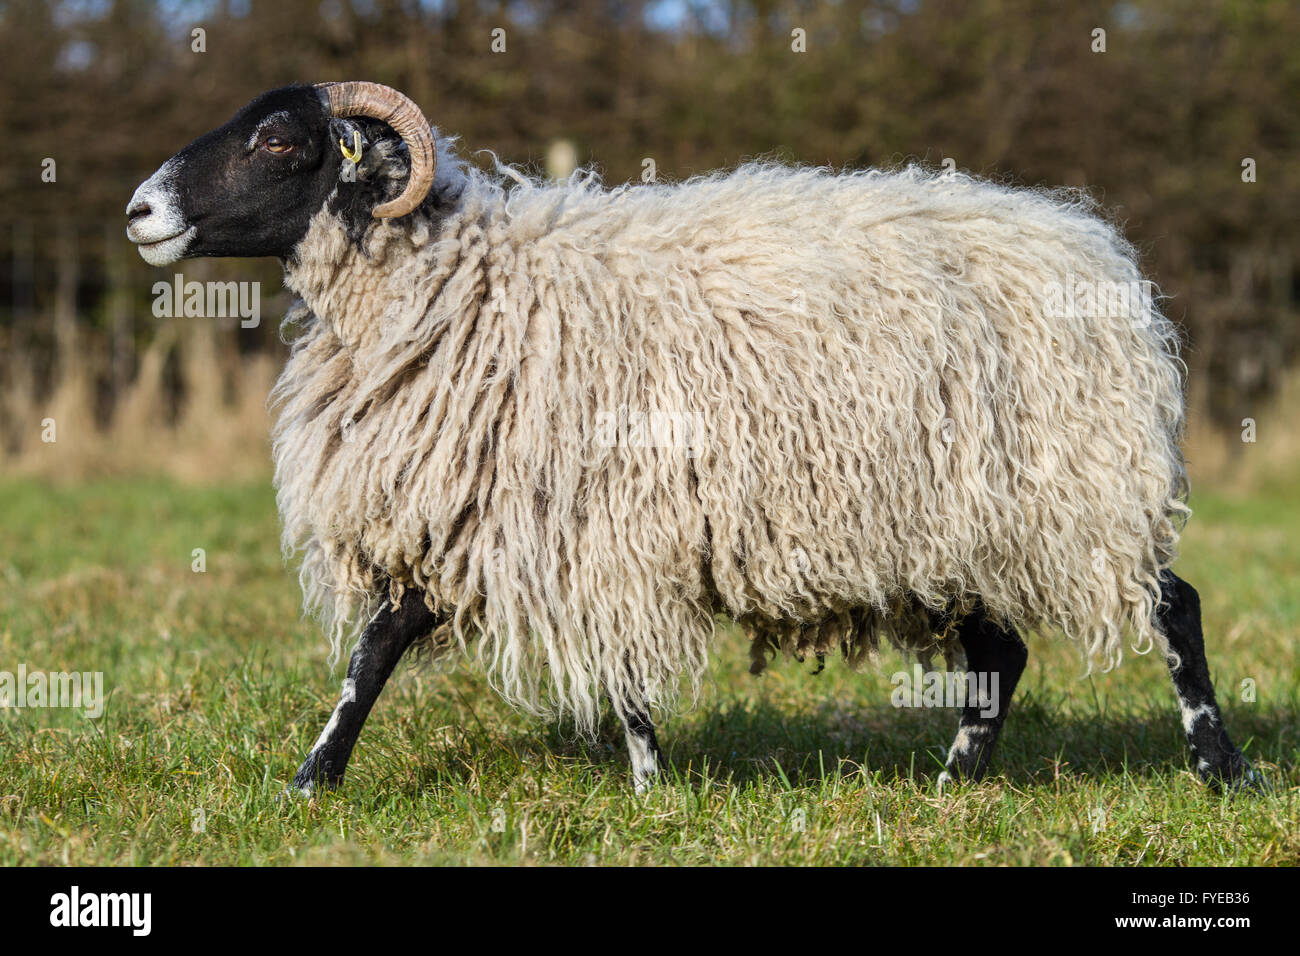 swaledale sheep in a field looking at the camera. The ewe has horns with this breed. Stock Photo